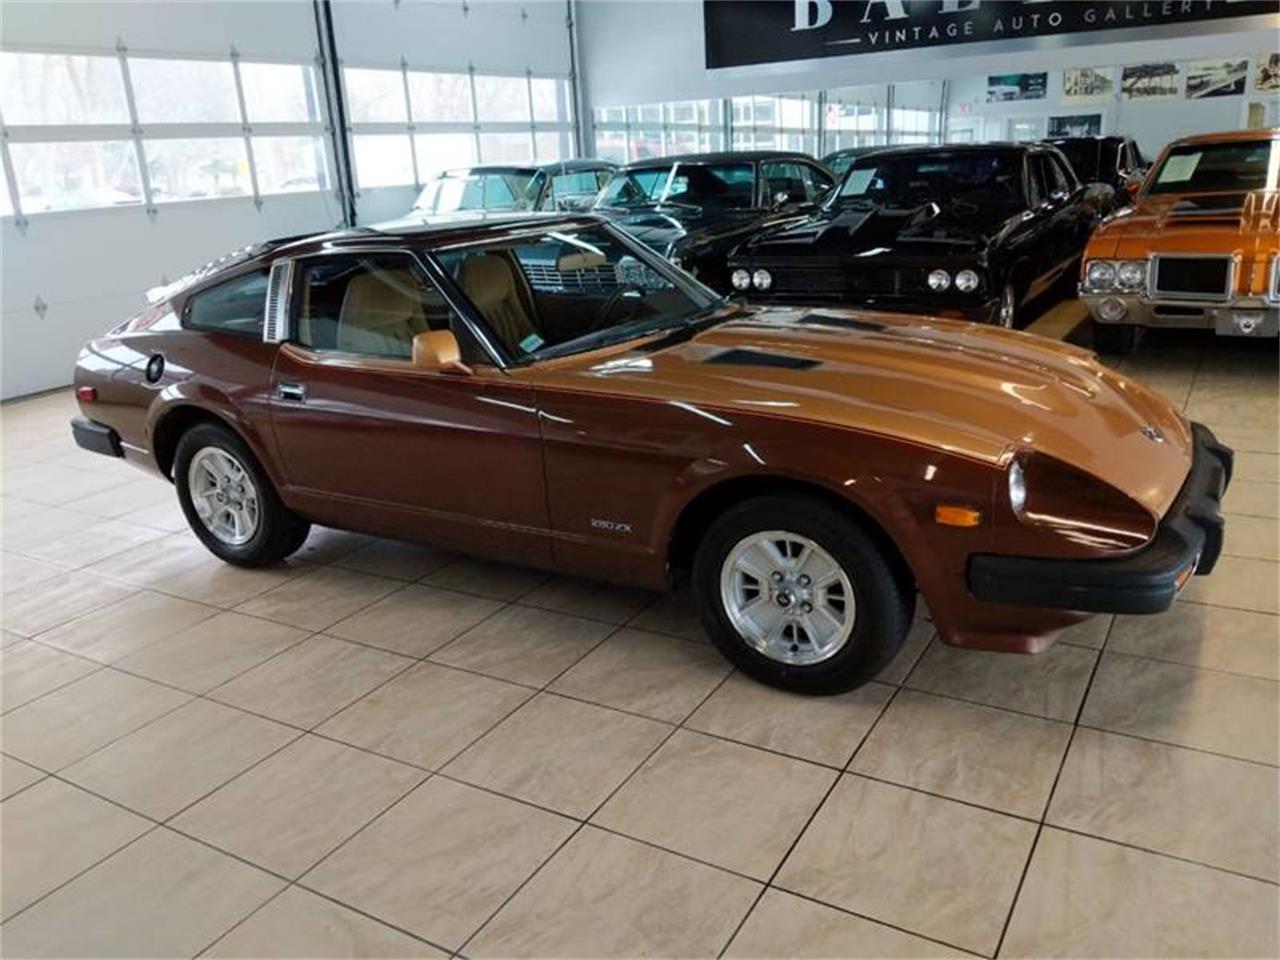 1979 Datsun 280ZX for sale in St. Charles, IL – photo 84